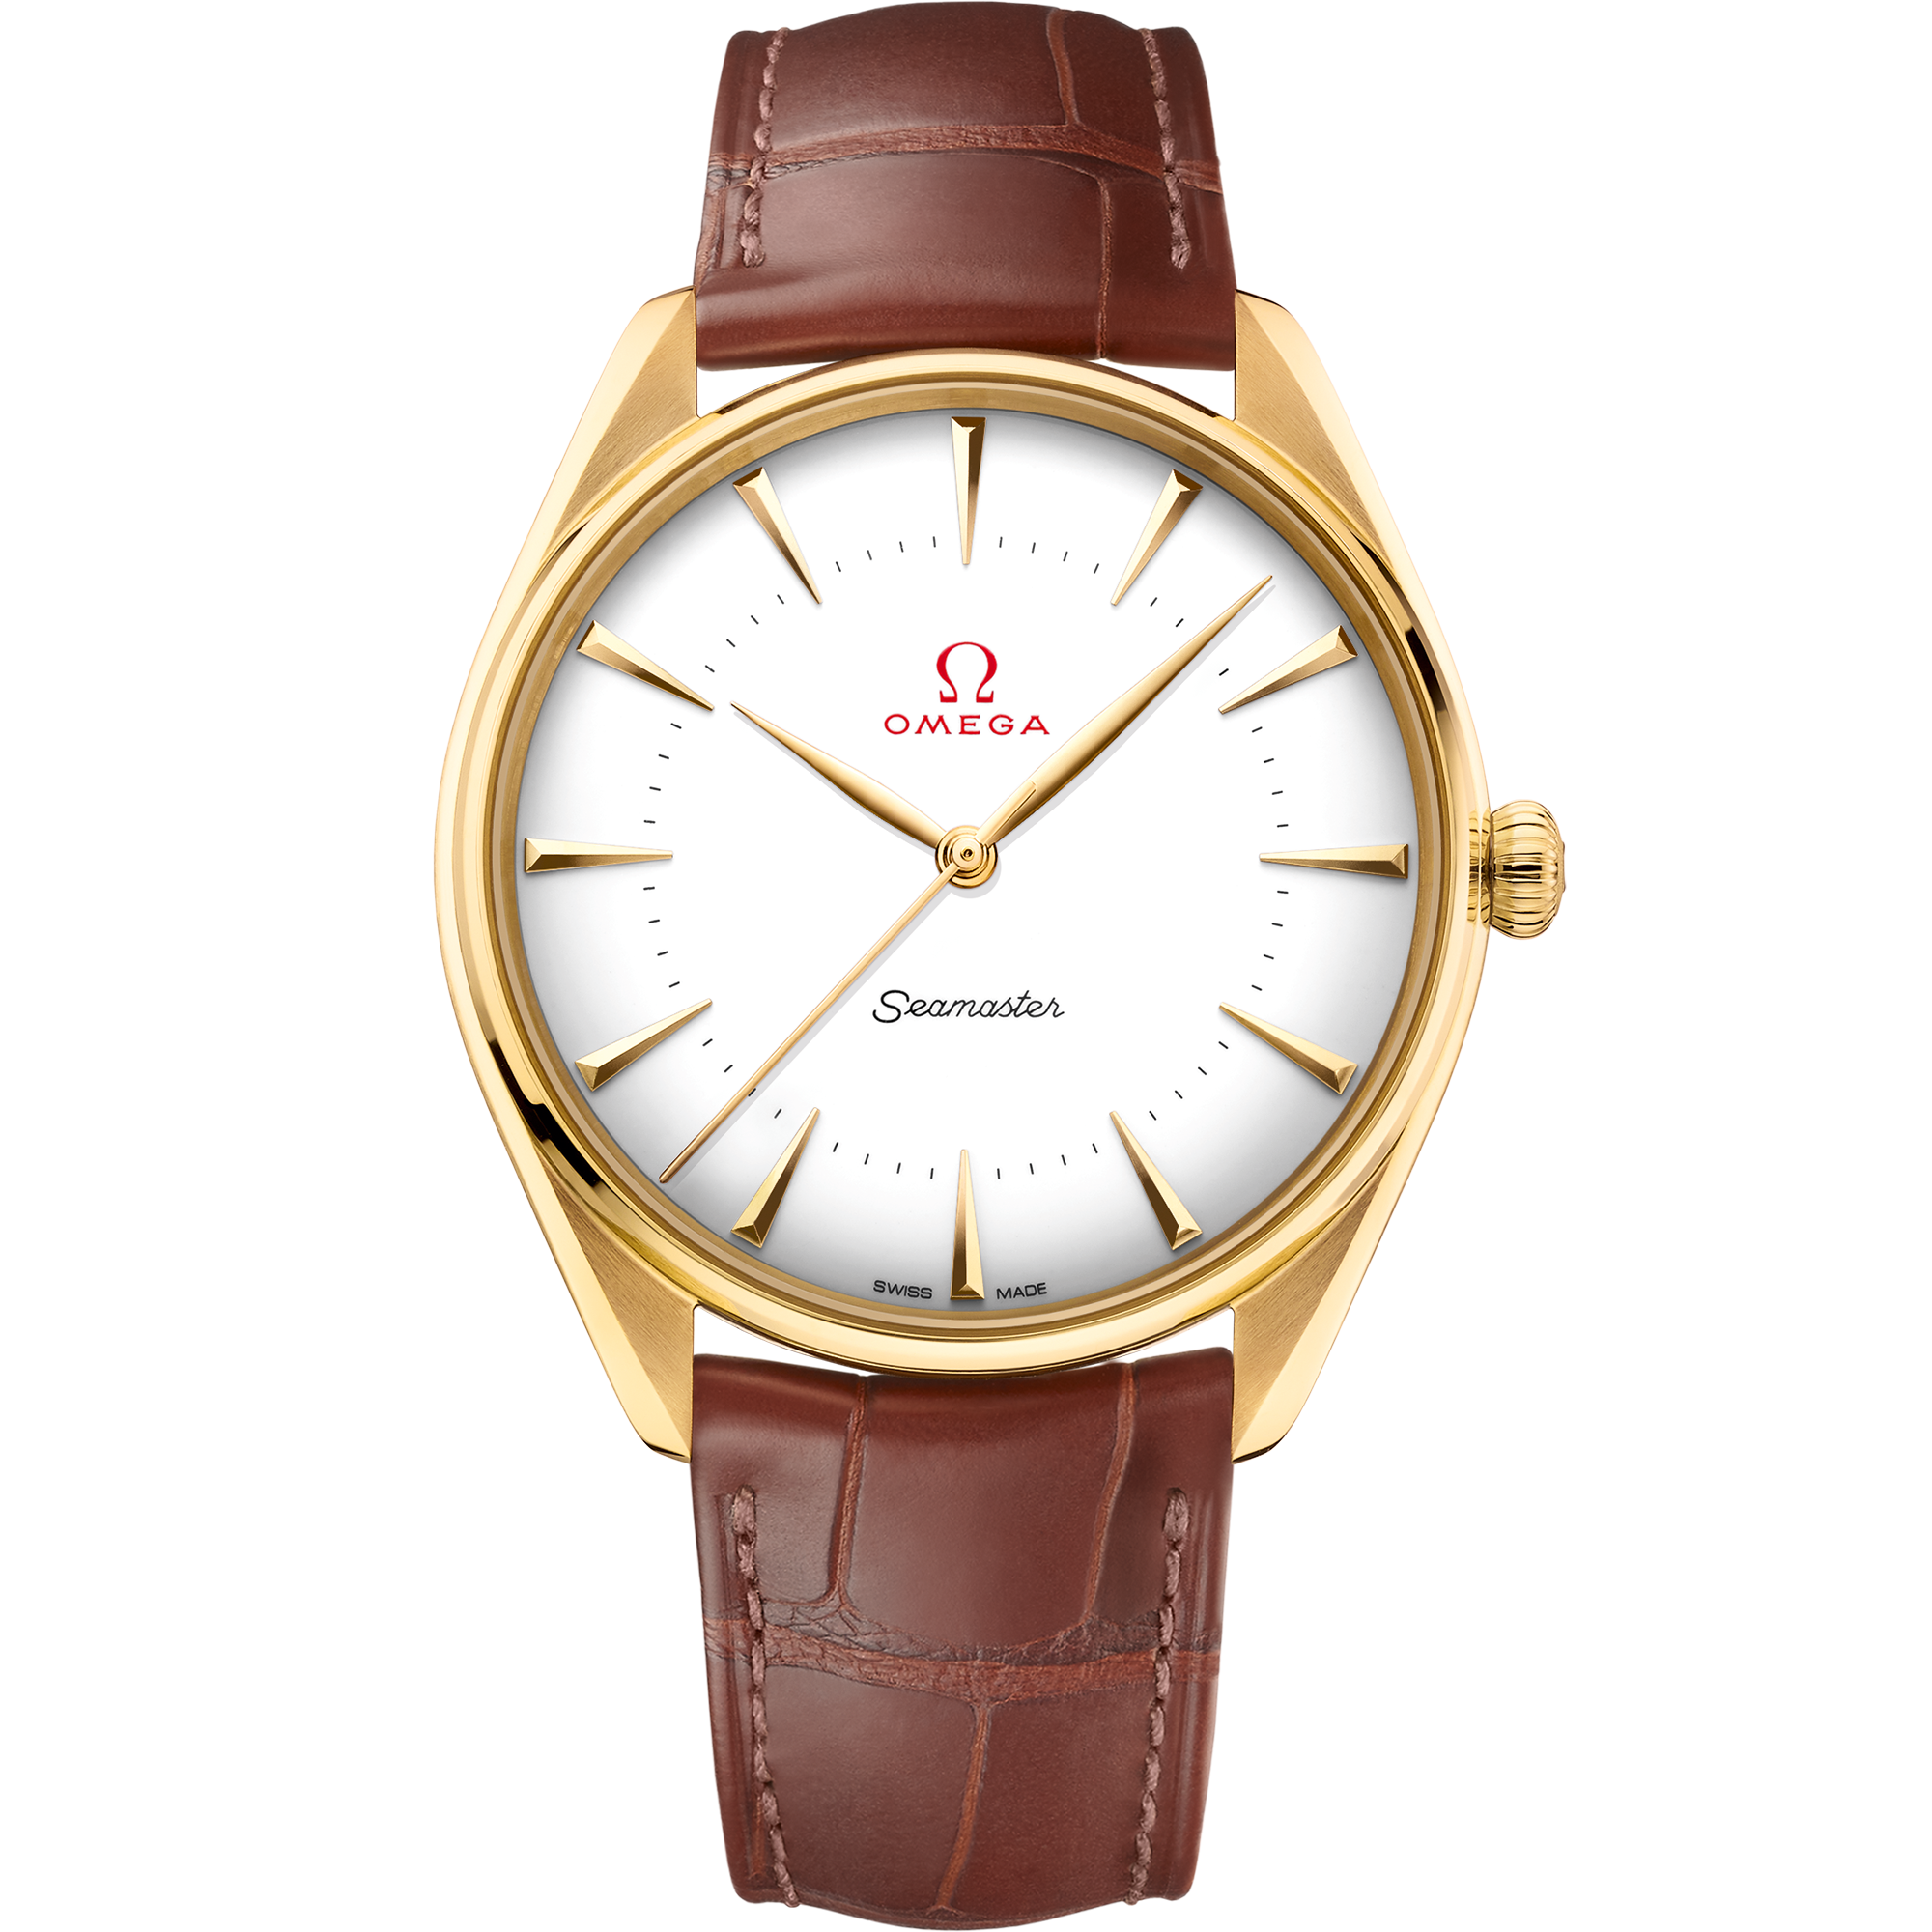 Seamaster 39.5 mm, yellow gold on leather strap - 522.53.40.20.04.001